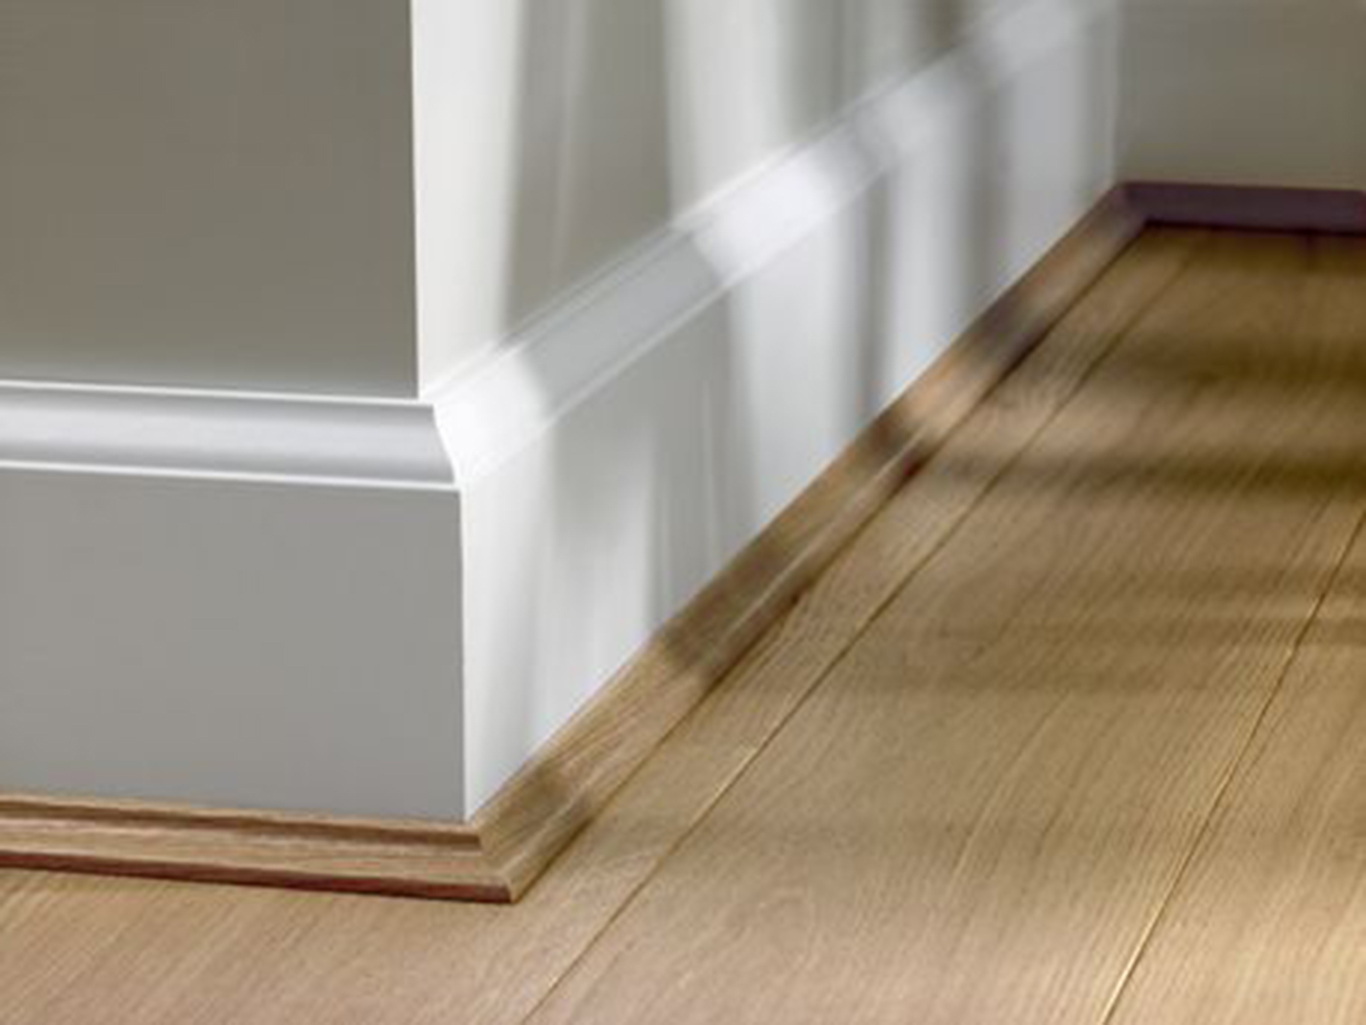 Wooden boards are a type of floor skirting.